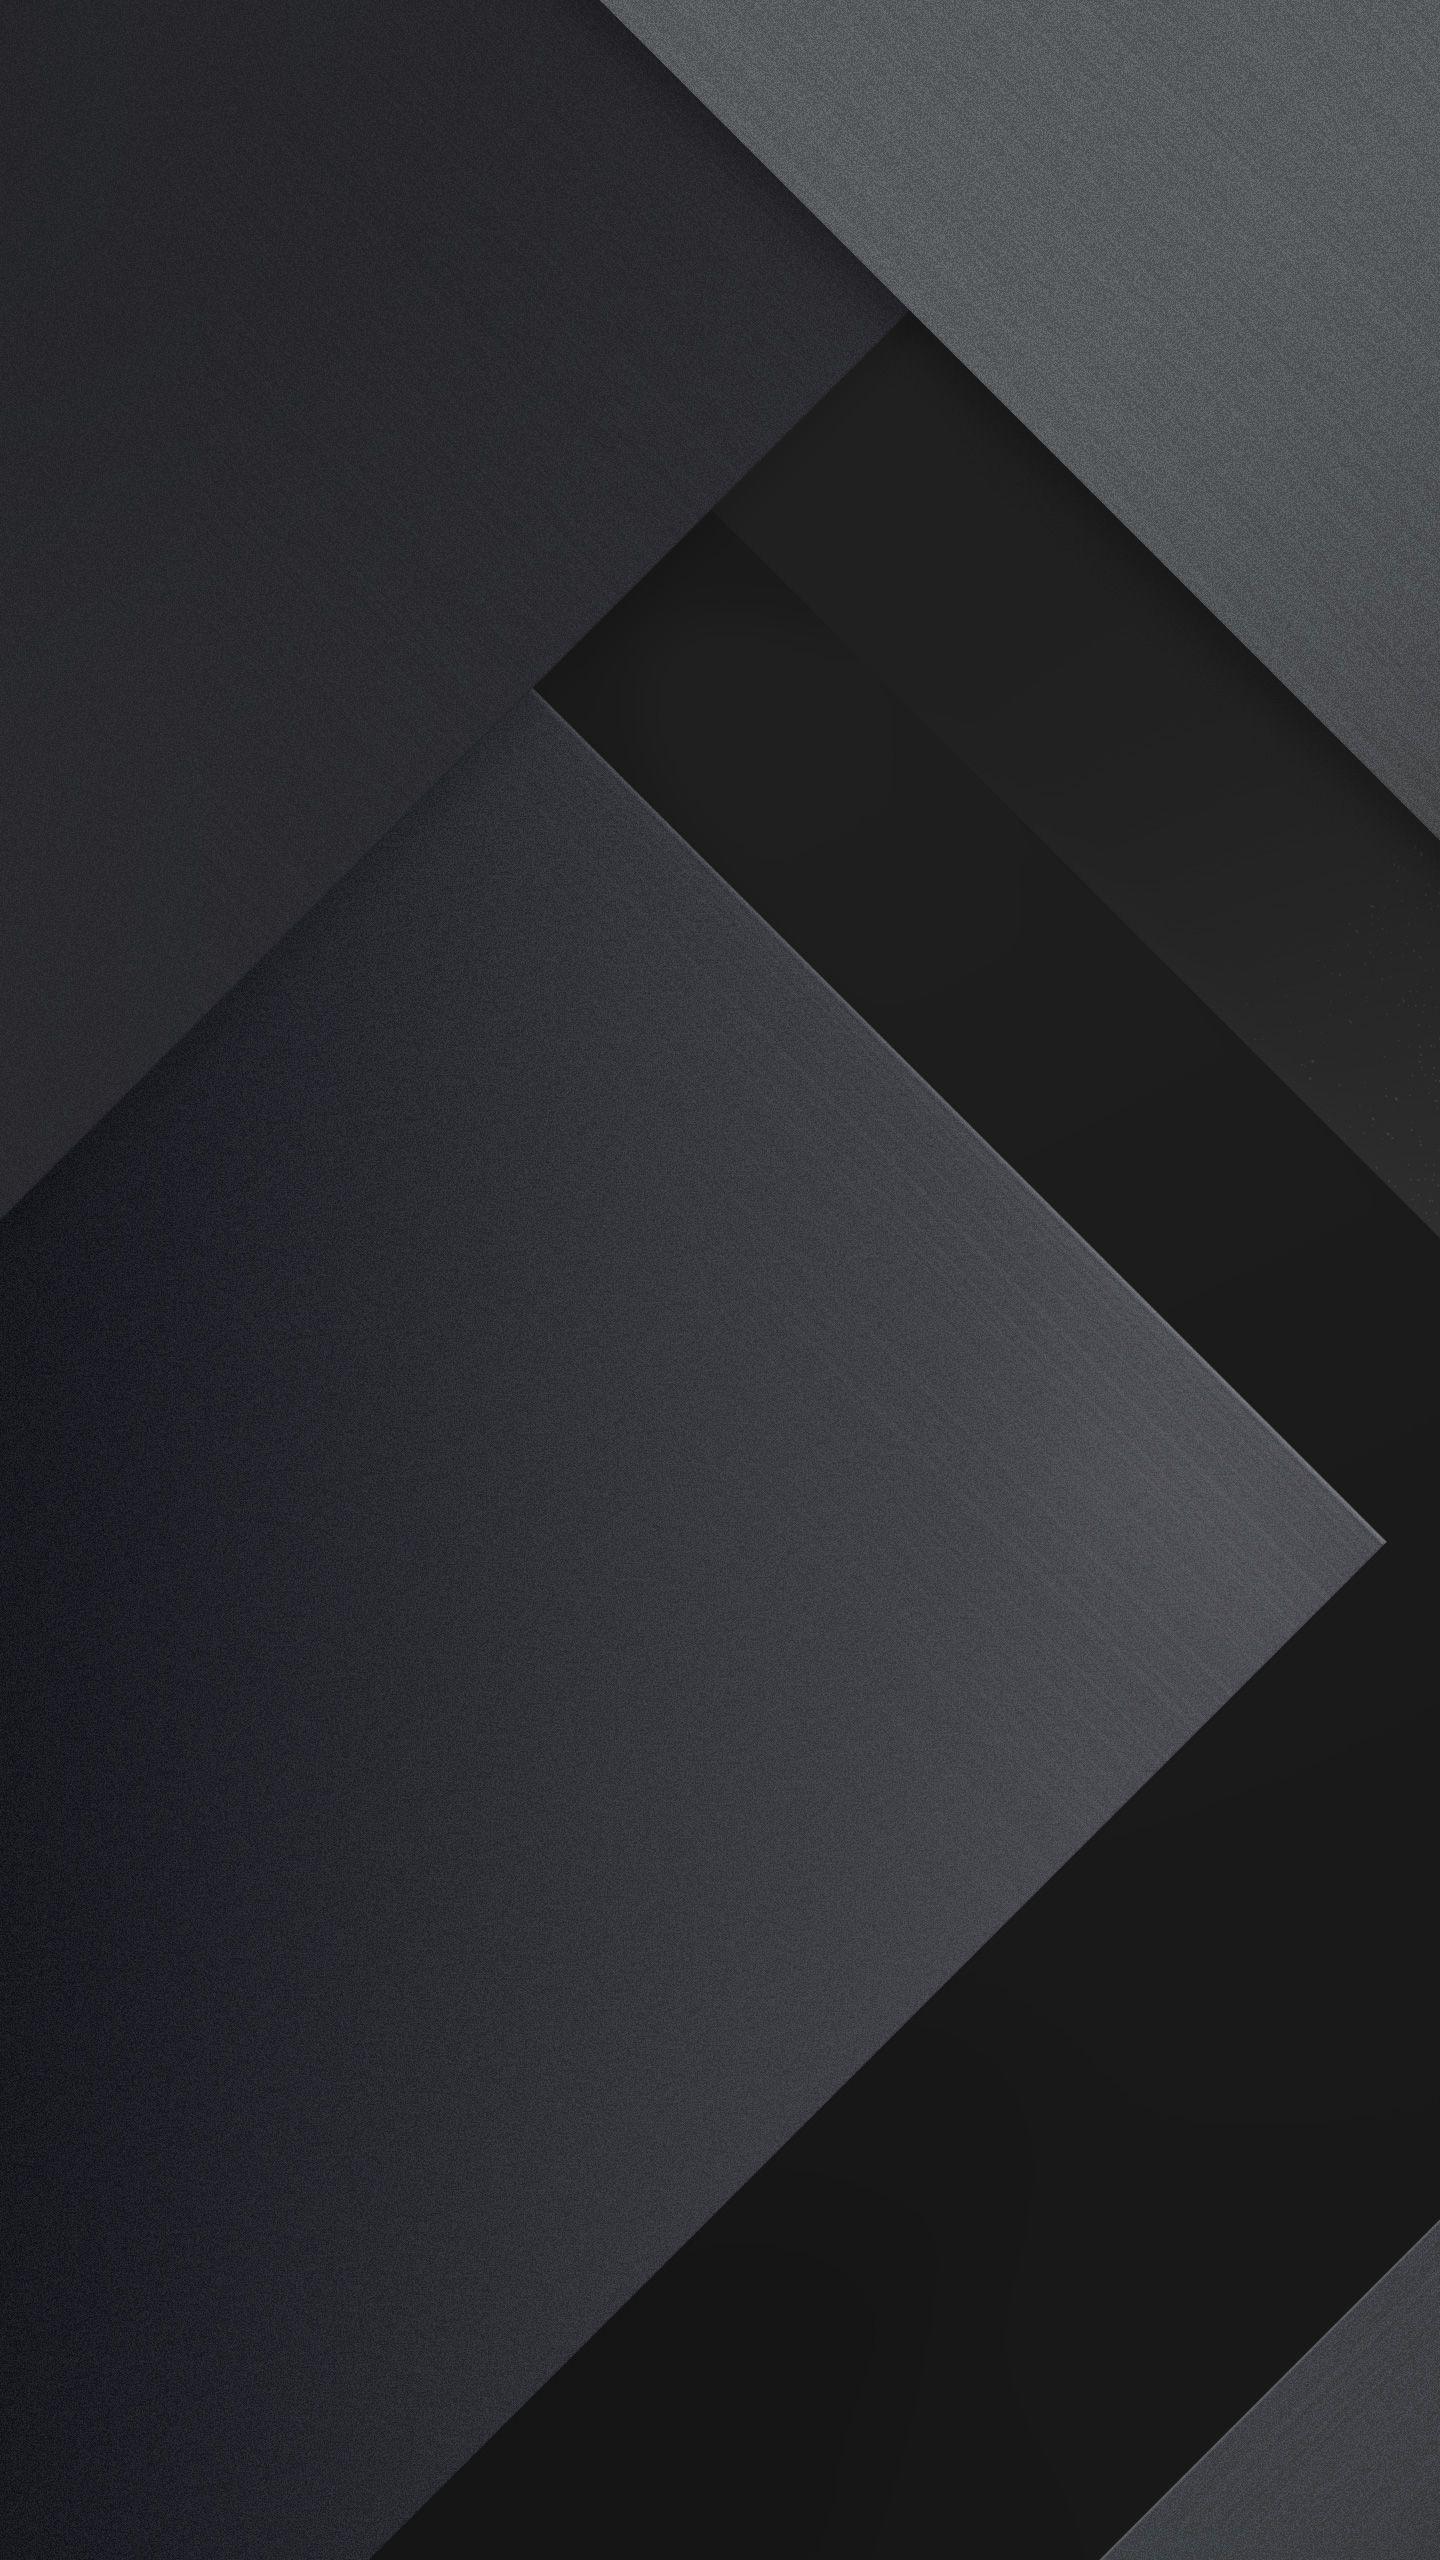 Diagonal Lines 6 for Samsung Galaxy S7 and Edge Wallpaper